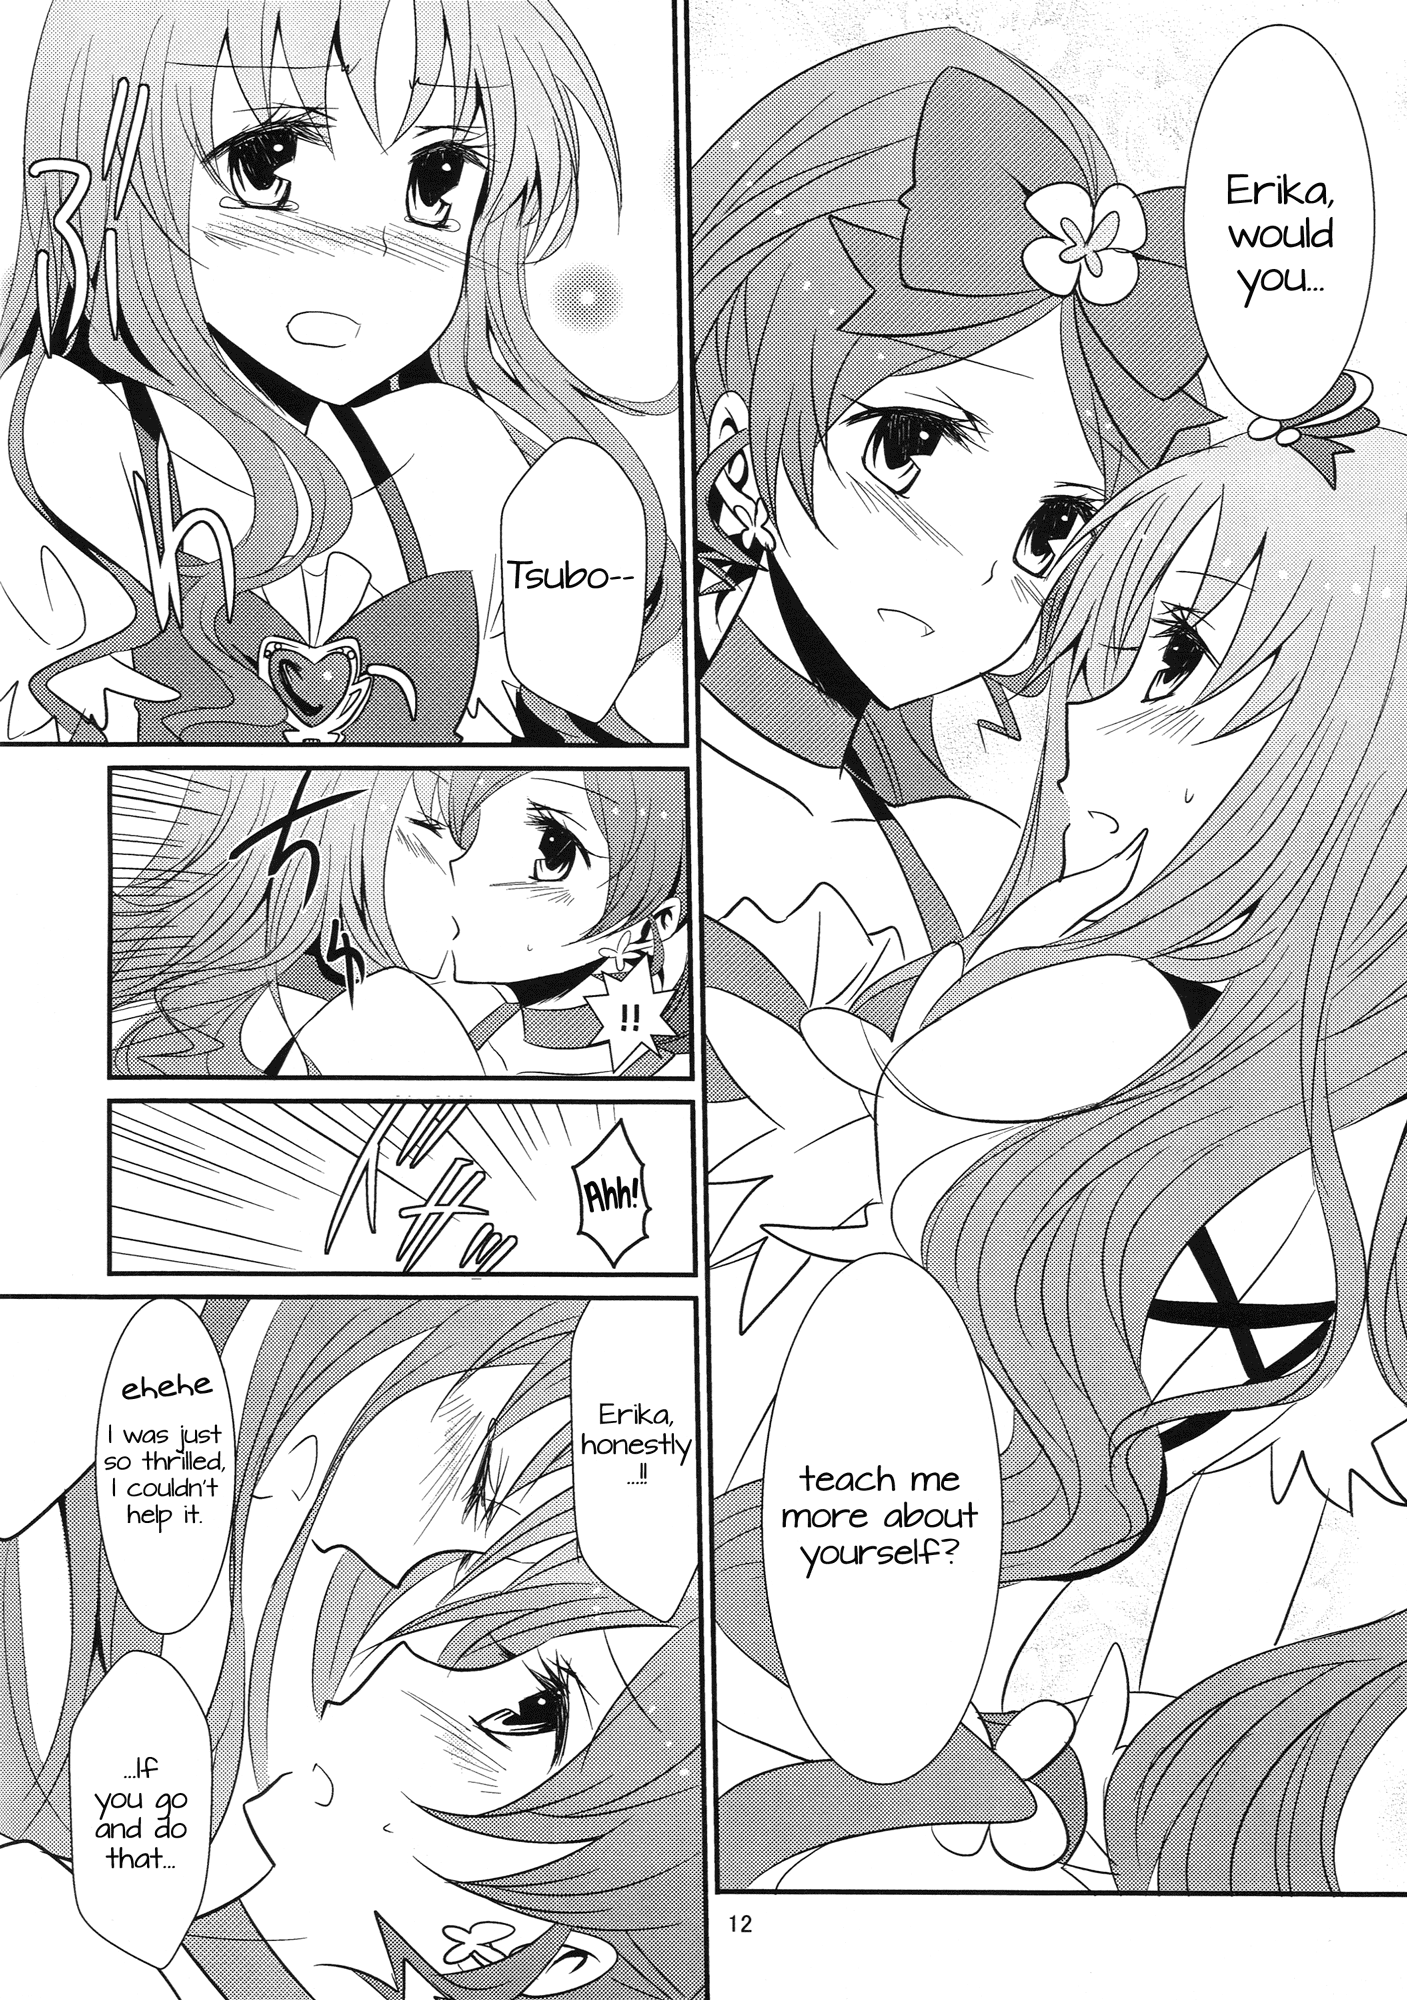 4ever Yours hentai manga picture 13